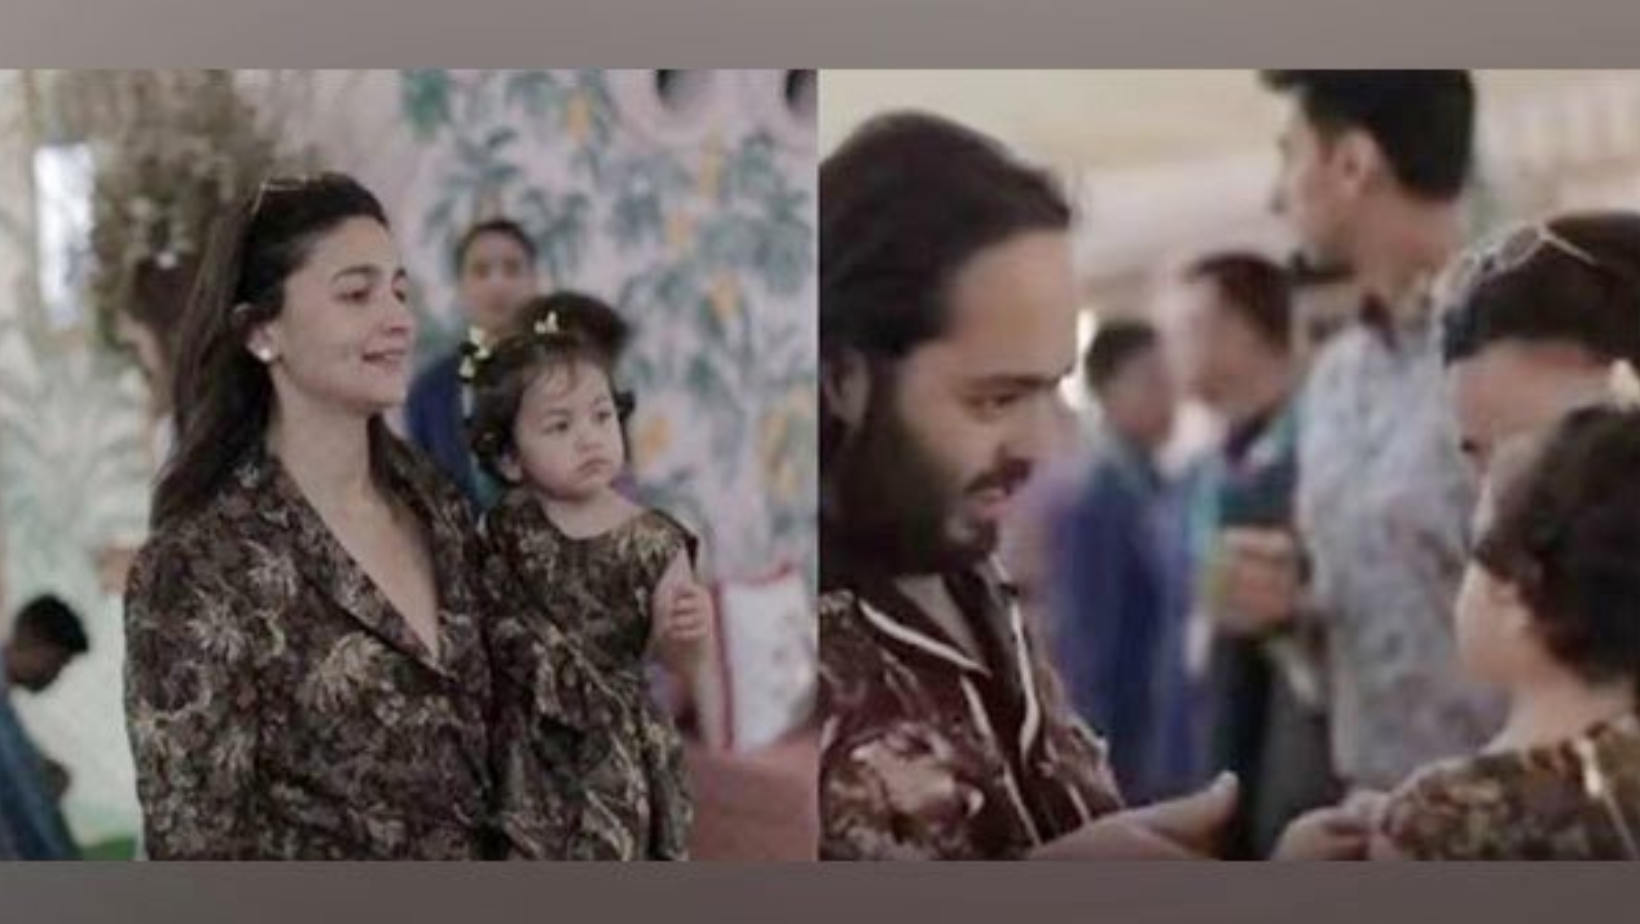 Alia Twins With Daughter Raha In Jungle Themed Outfit, Catch Up With Anant Ambani At His Pre-Wedding Festivities